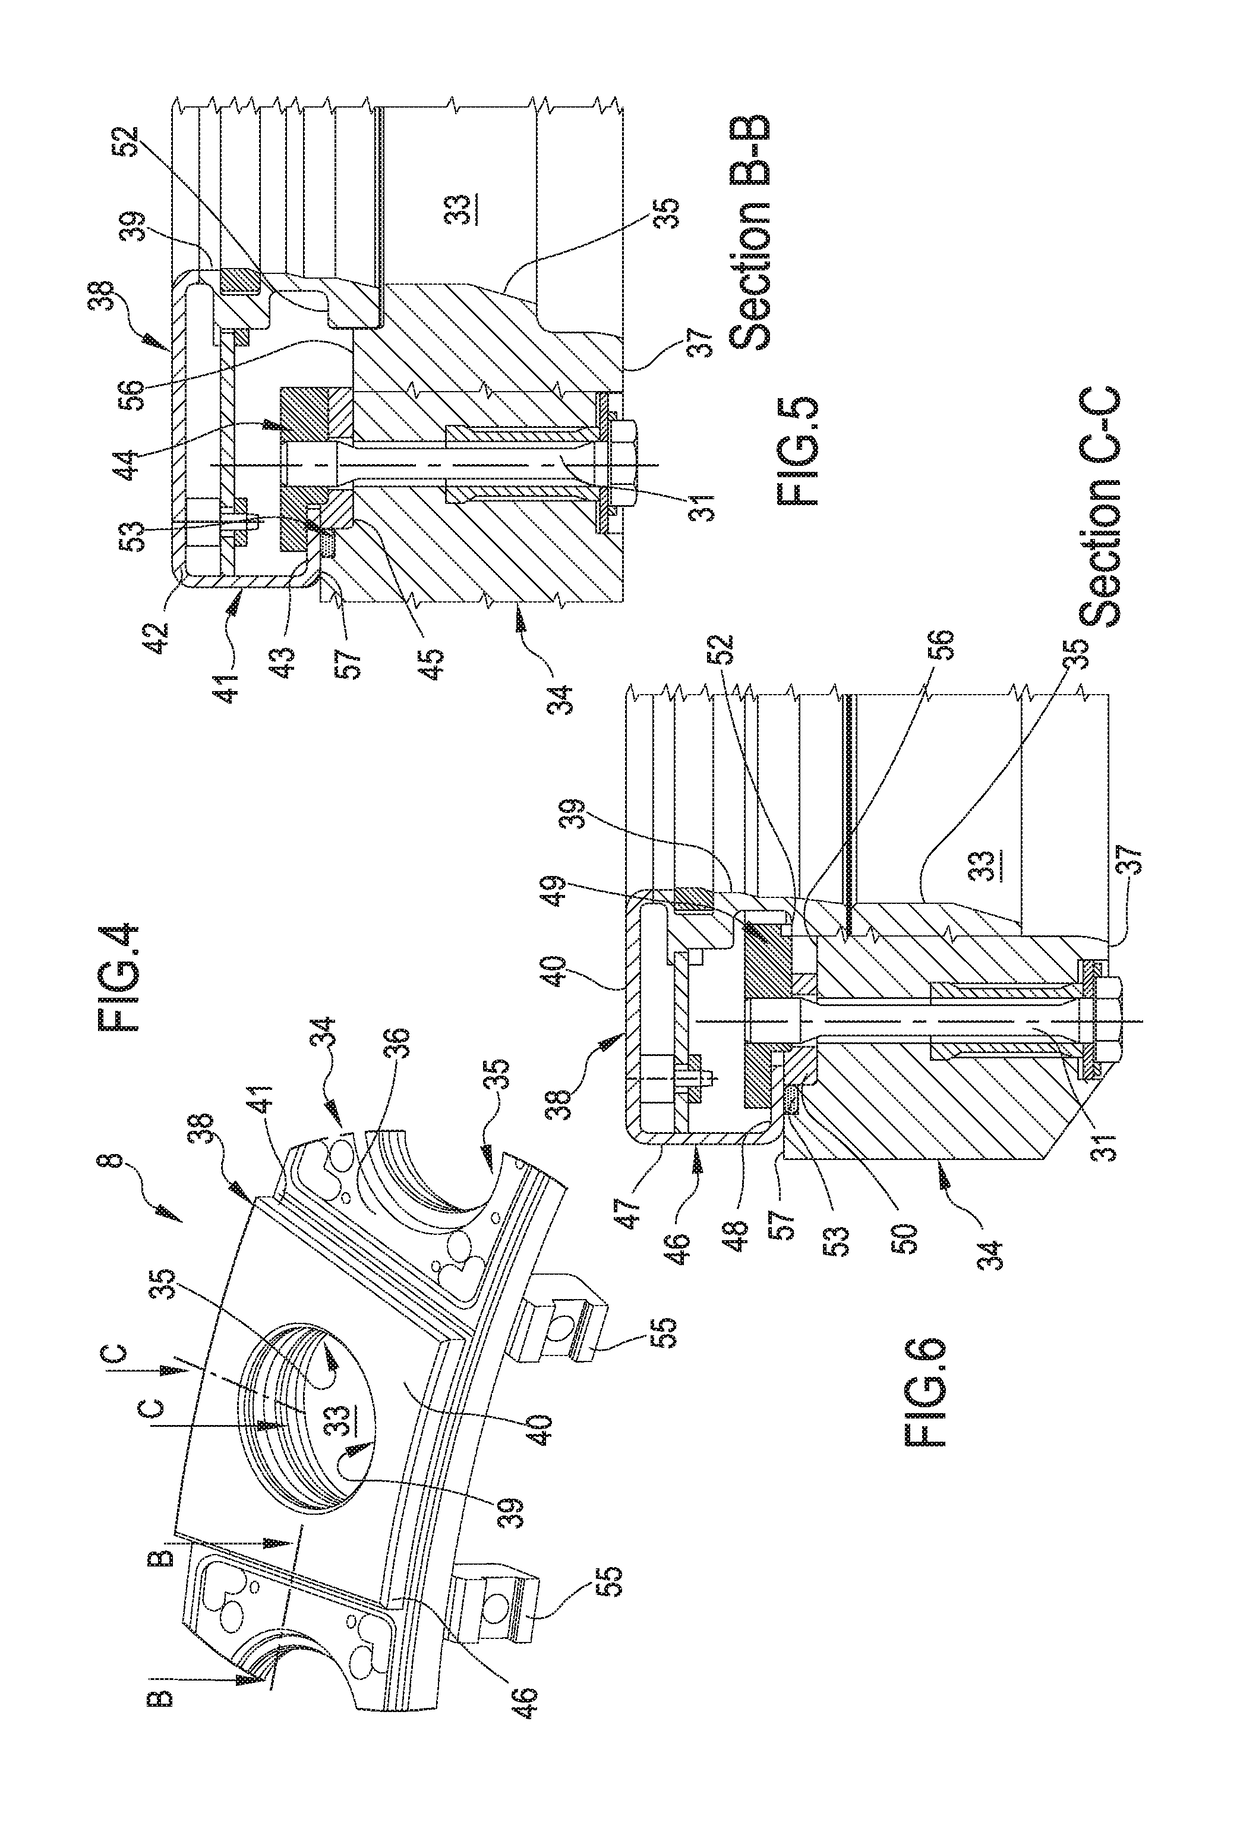 Combustor front assembly for a gas turbine